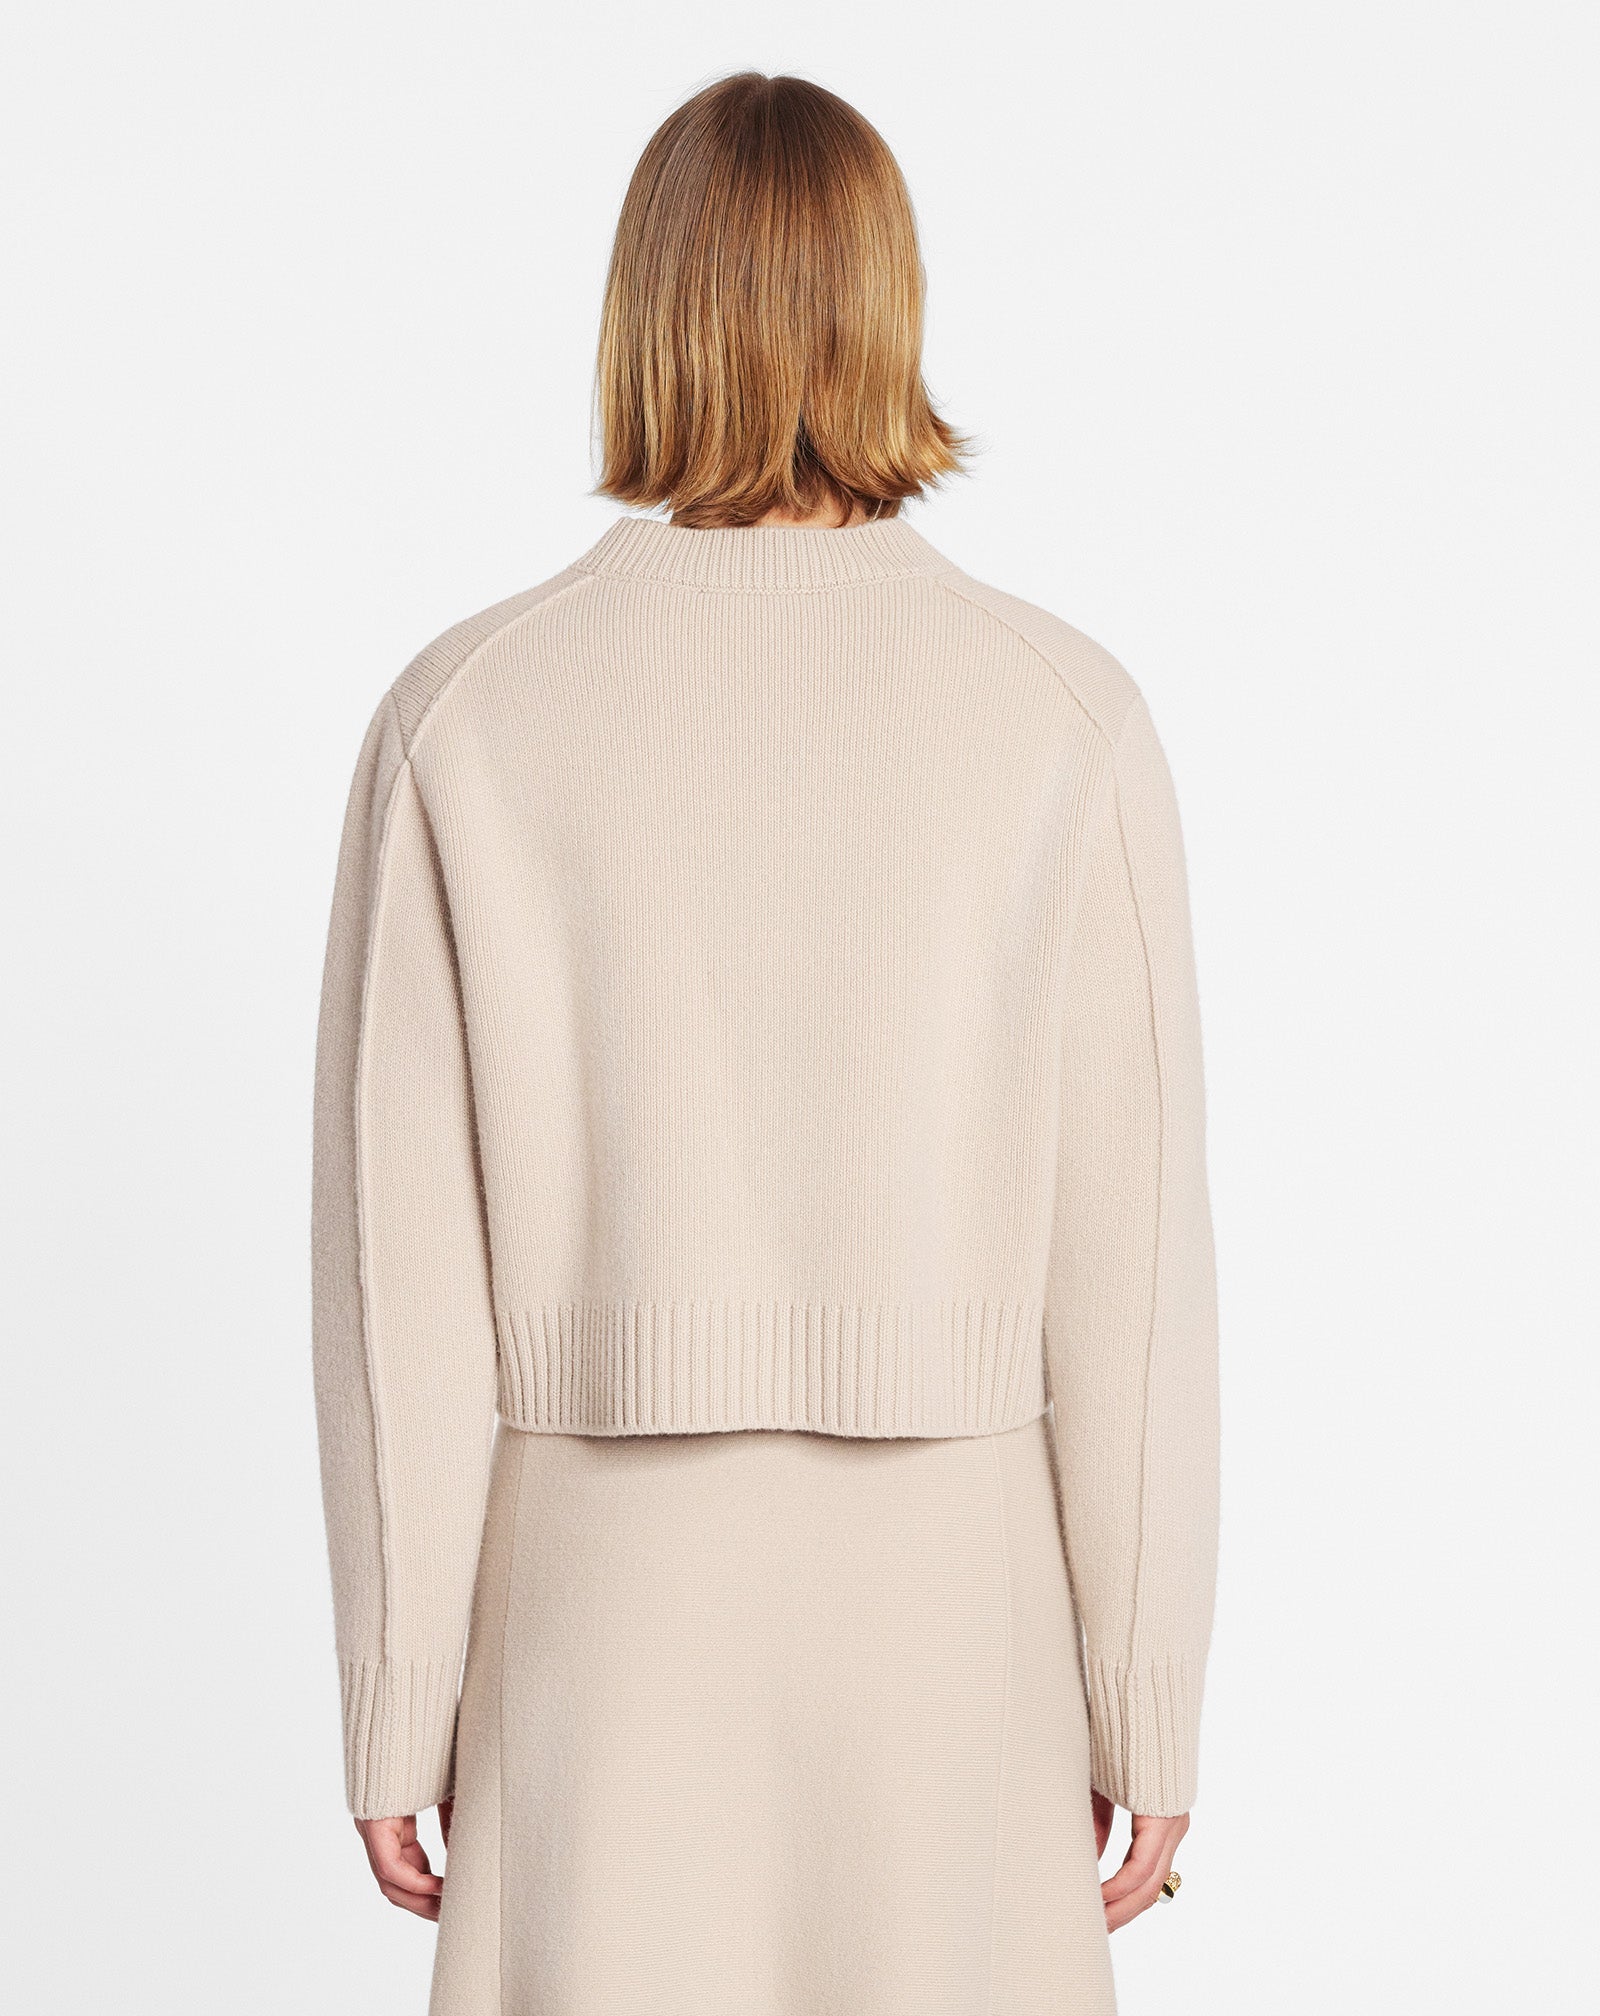 CROPPED WOOL AND CASHMERE CREWNECK SWEATER, PAPER